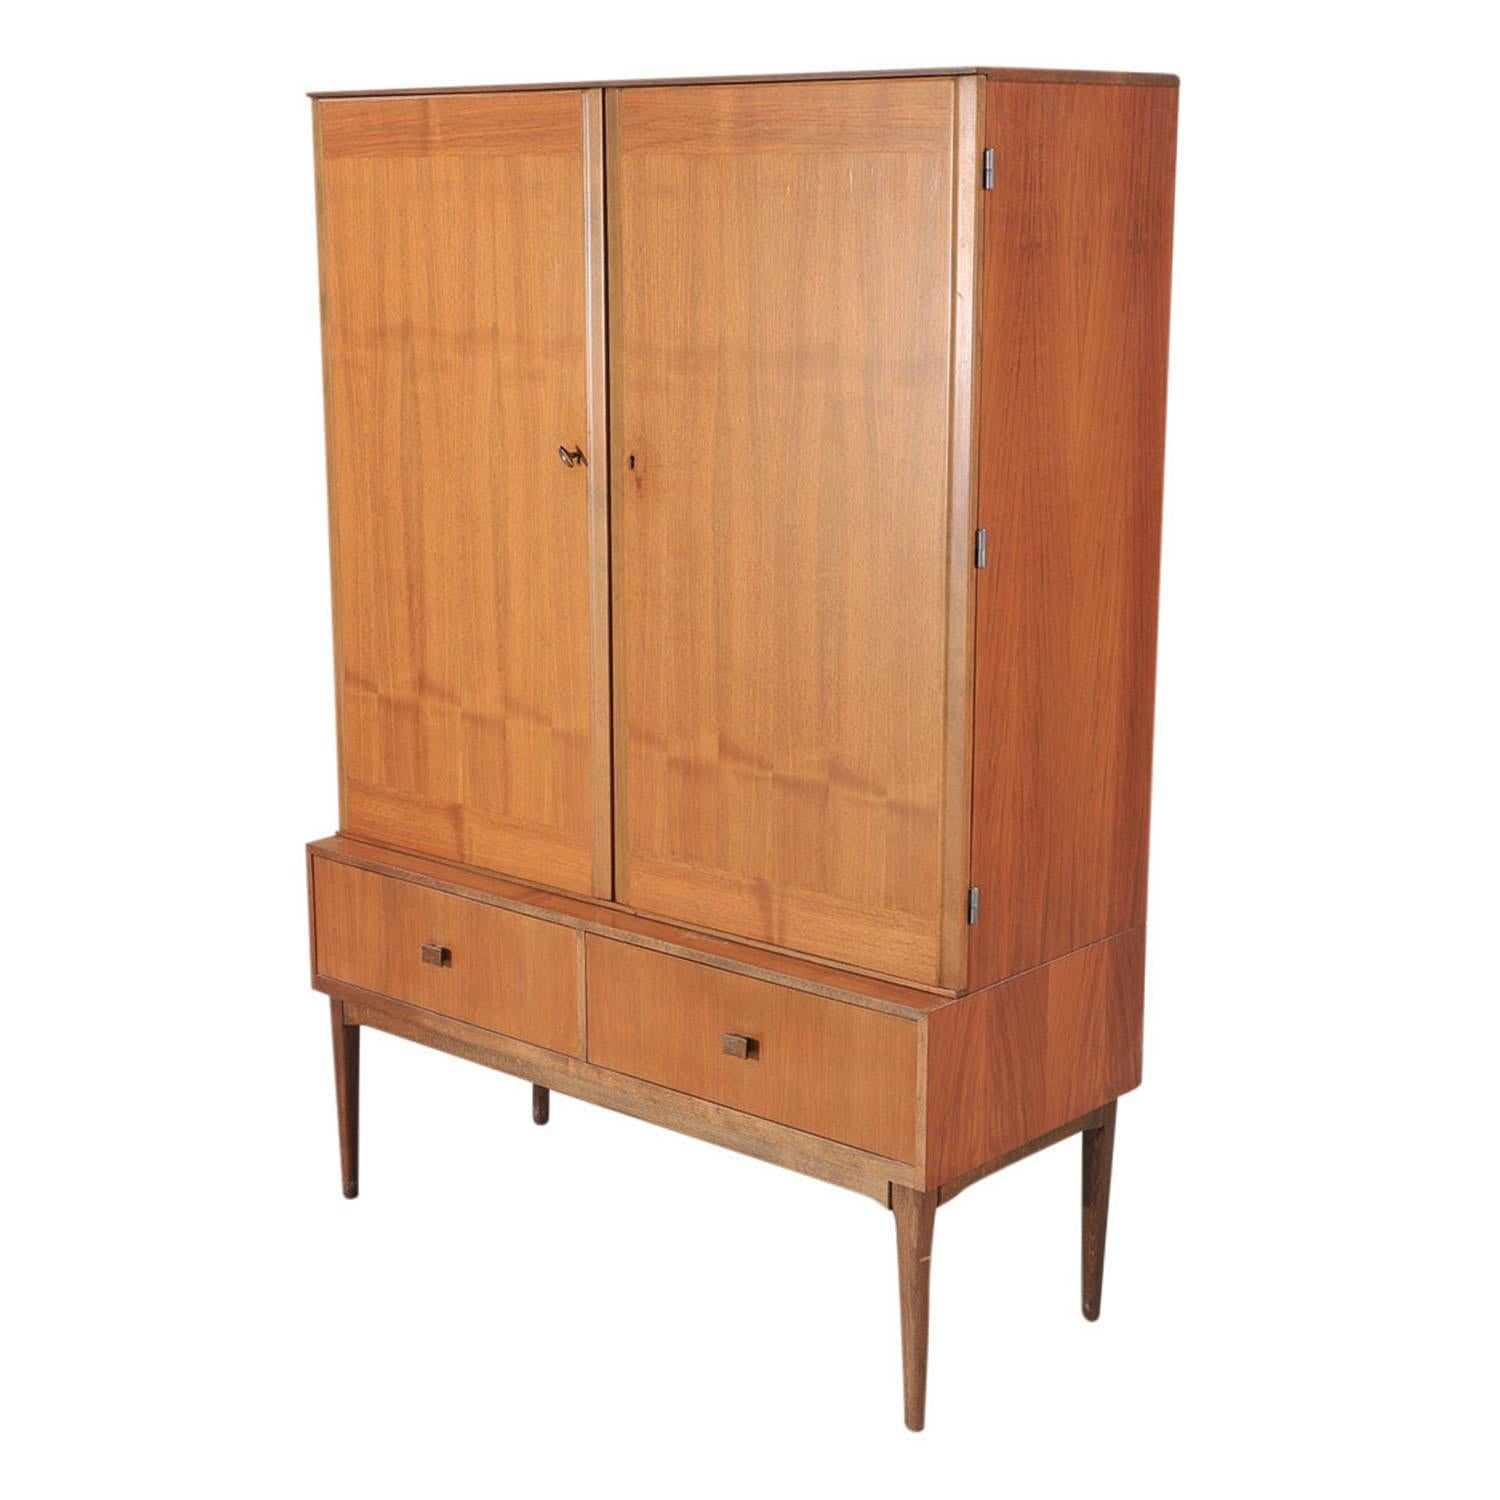 A 20th Century, vintage Mid-Century modern Danish dining room cabinet made of hand crafted polished, partly veneered Walnut, in good condition. The Scandinavian cupboard is composed with two large doors and two lower drawers which detailed by brass